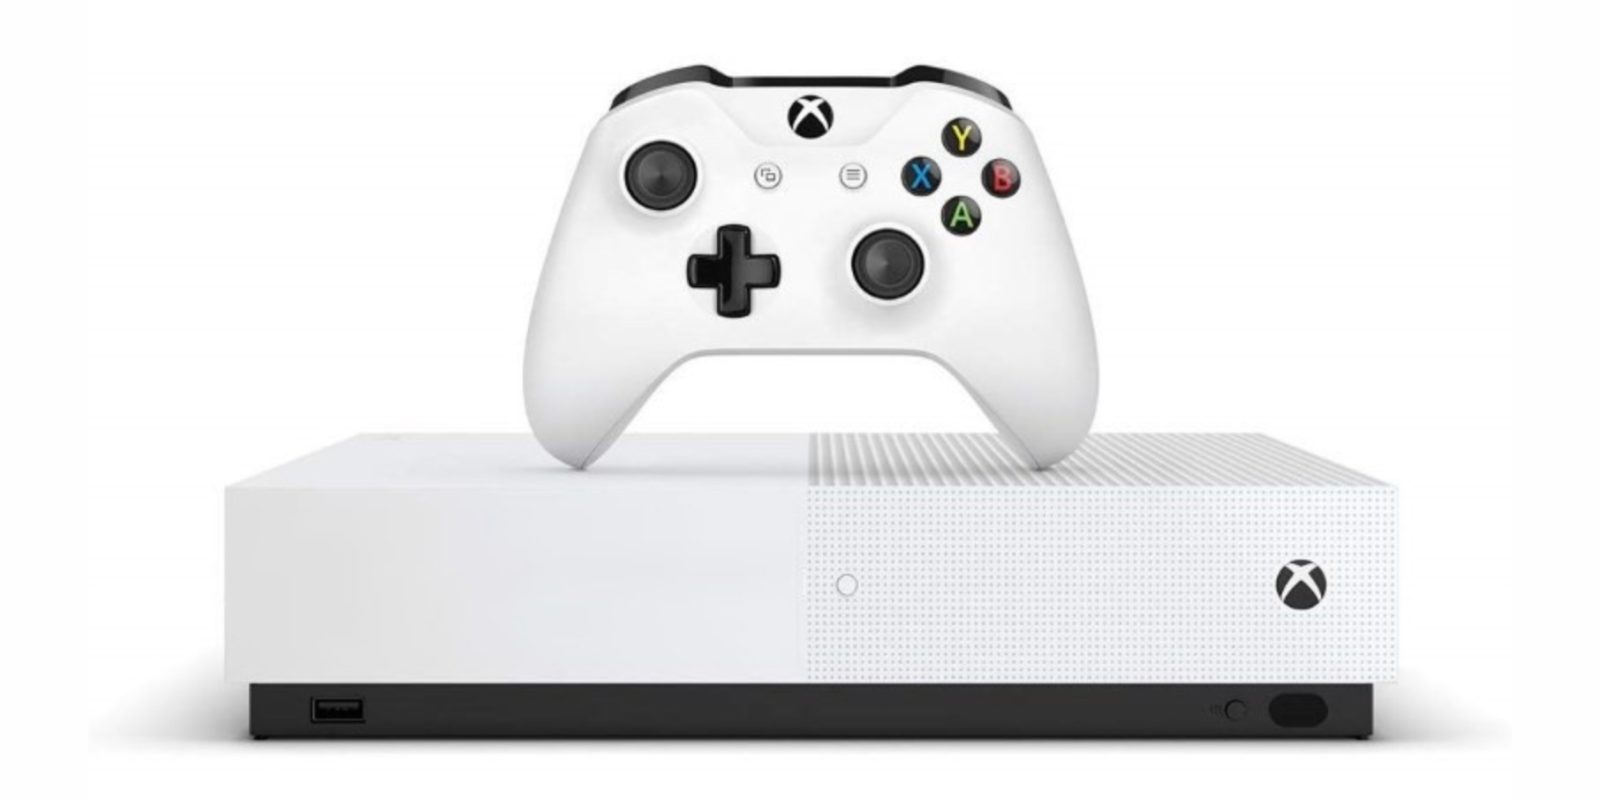 Xbox One S All Digital slated for May release date - 9to5Toys